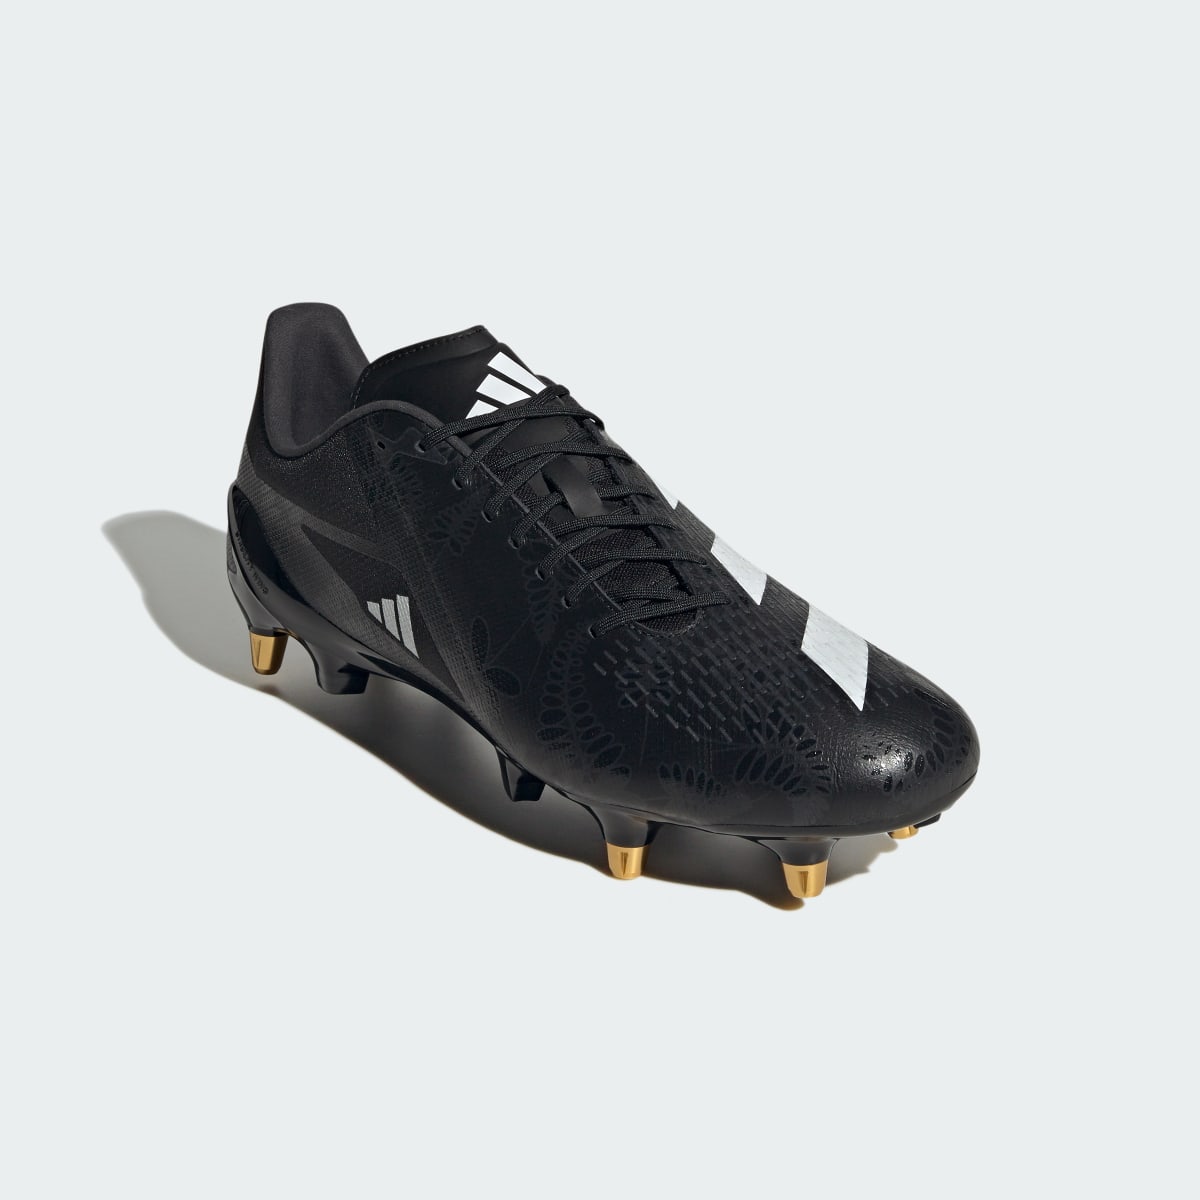 Adidas Adizero RS15 Pro Soft Ground Rugby Boots. 5